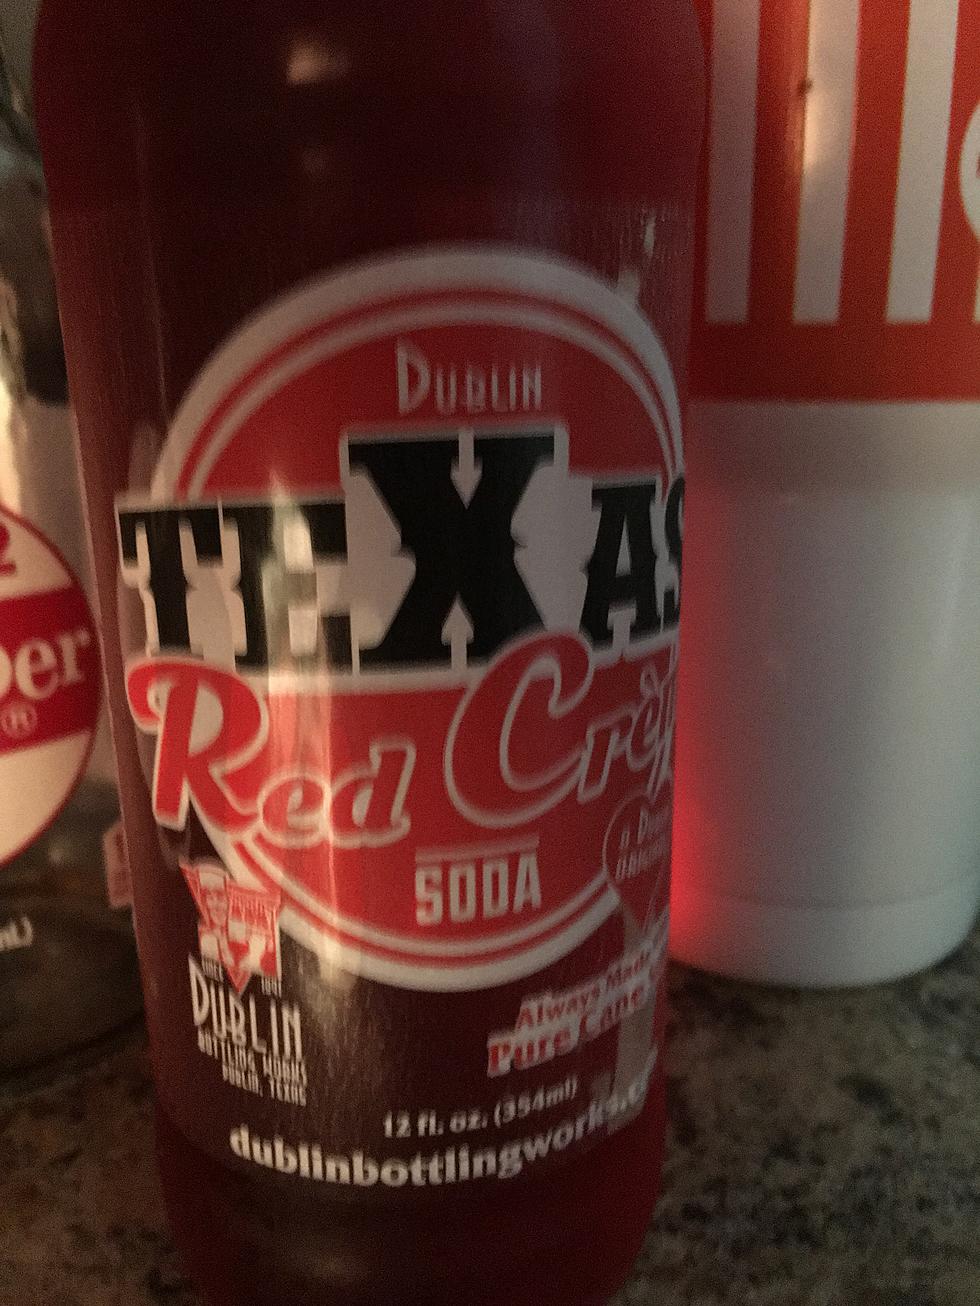 Dublin’s Texas Red Creme Soda is Easter Treat